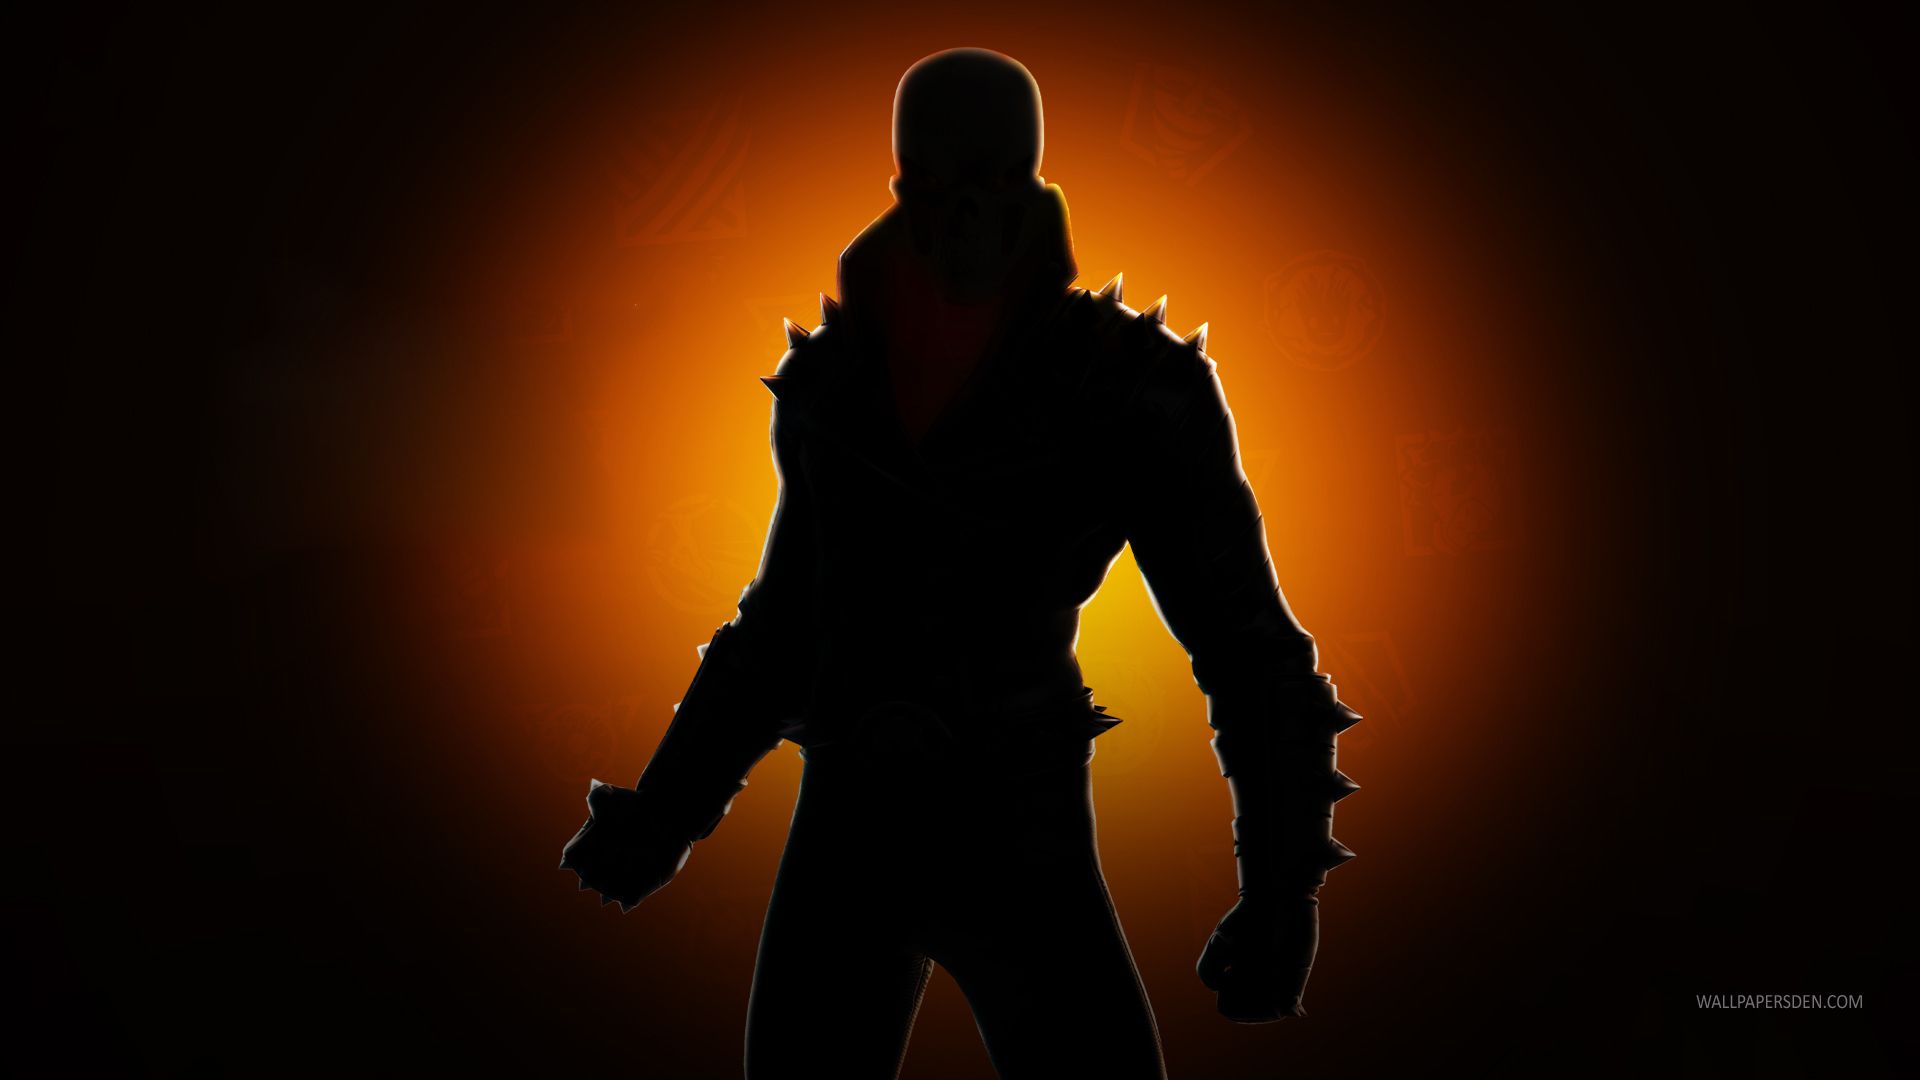 Ghost Rider Fortnite Chapter Season 4 Wallpaper, HD Games 4K Wallpaper, Image, Photo and Background